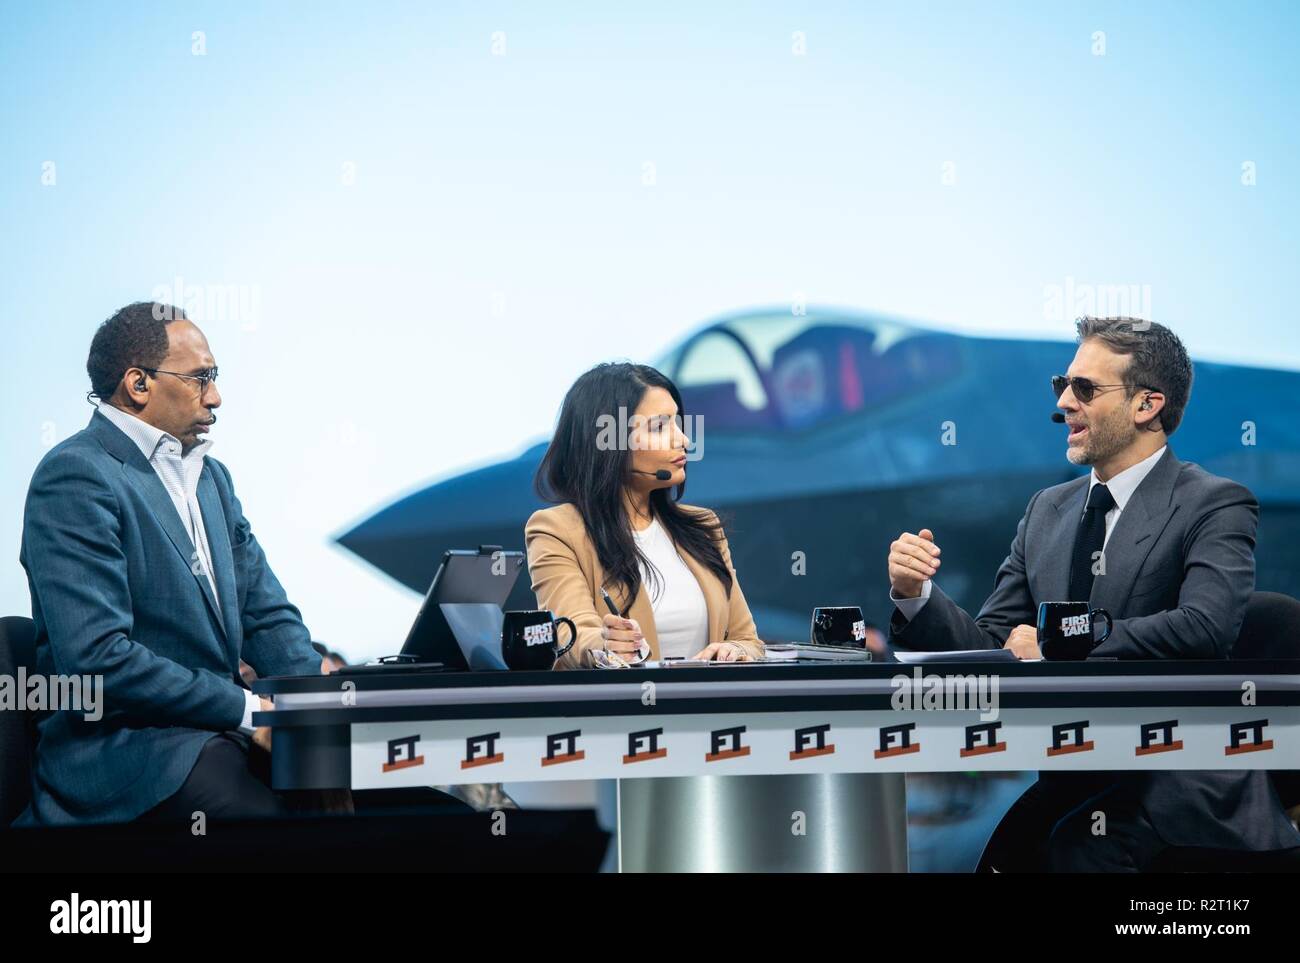 ESPN First Take hosts, Stephen A. Smith, Molly Qerim Rose and Max Kellerman, debate various sports topics during a live show at Luke Air Force Base, Ariz. Nov. 9, 2018. As part of an annual initiative, ESPN First Take televises their live show on military installations to honor military service members near Veterans Day. Stock Photo